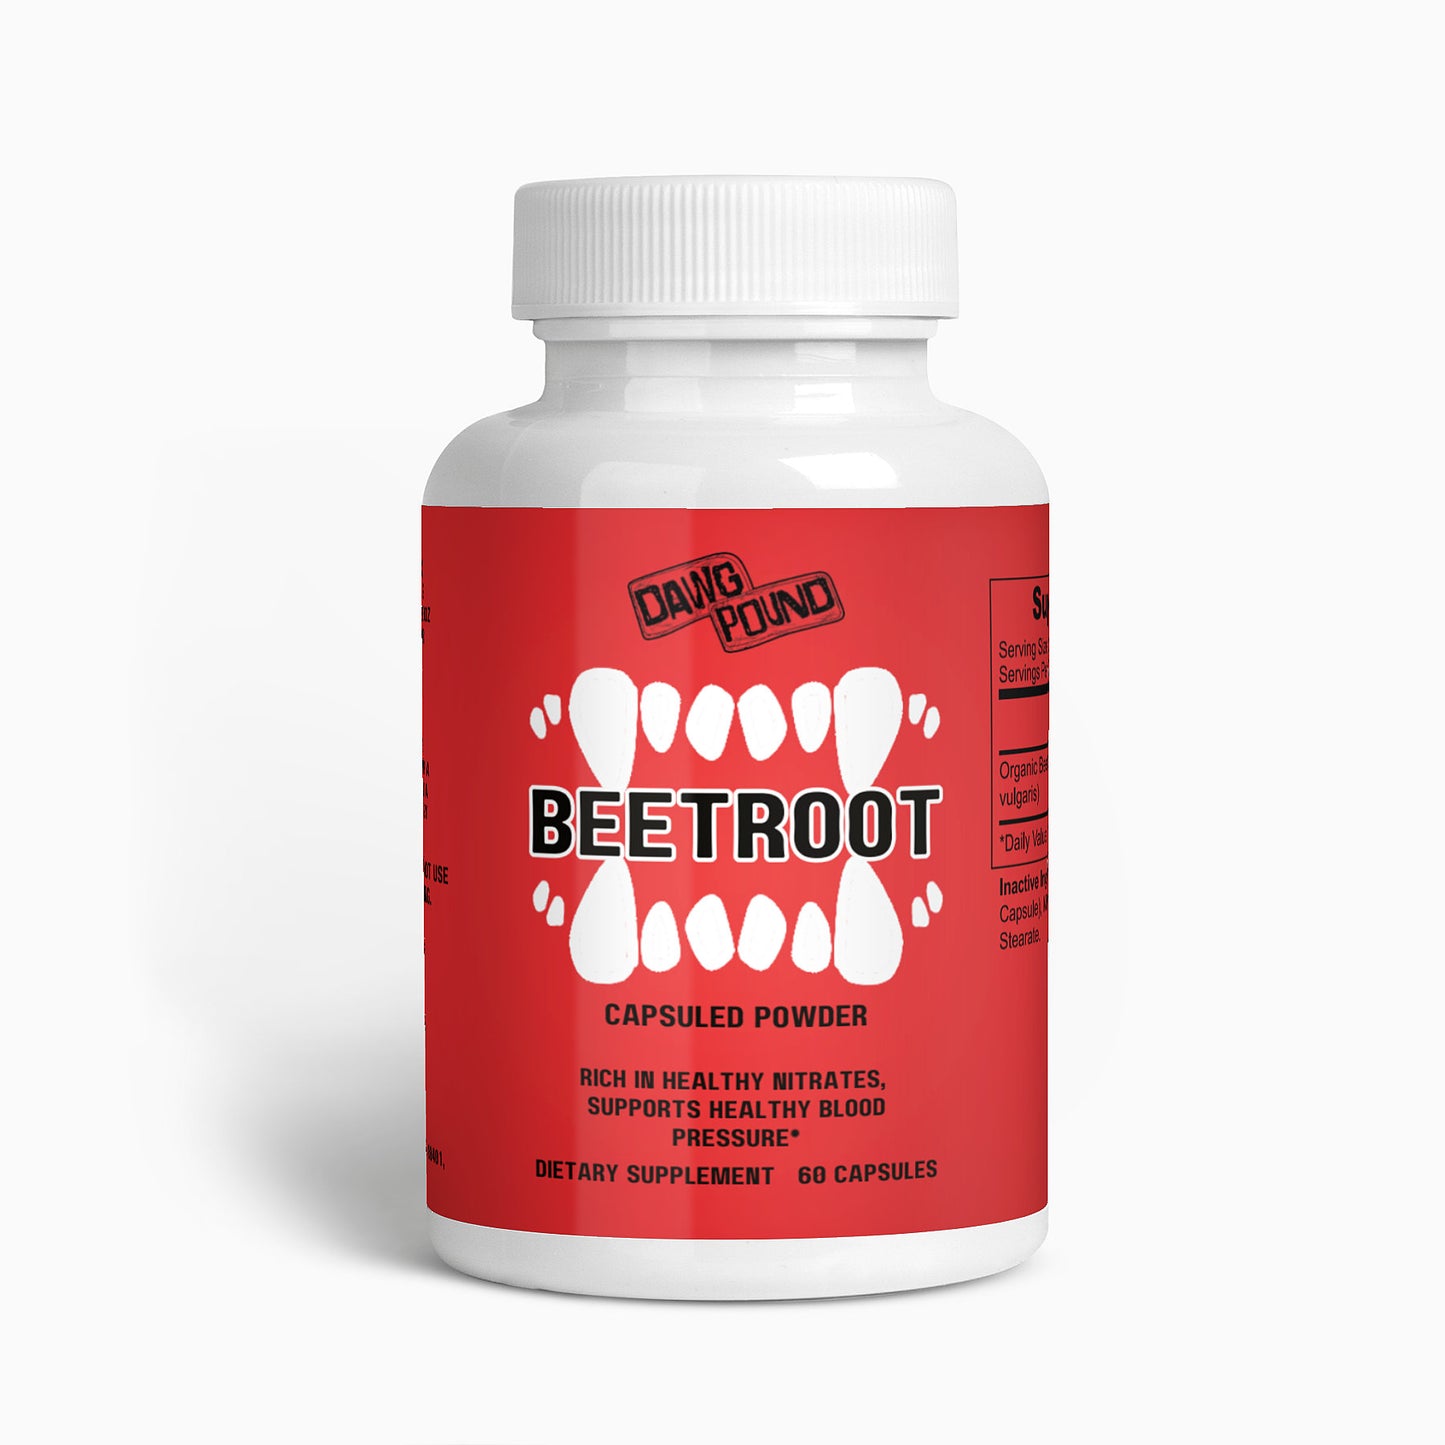 Dawg Pound Beetroot Supplement Capsules - Front View